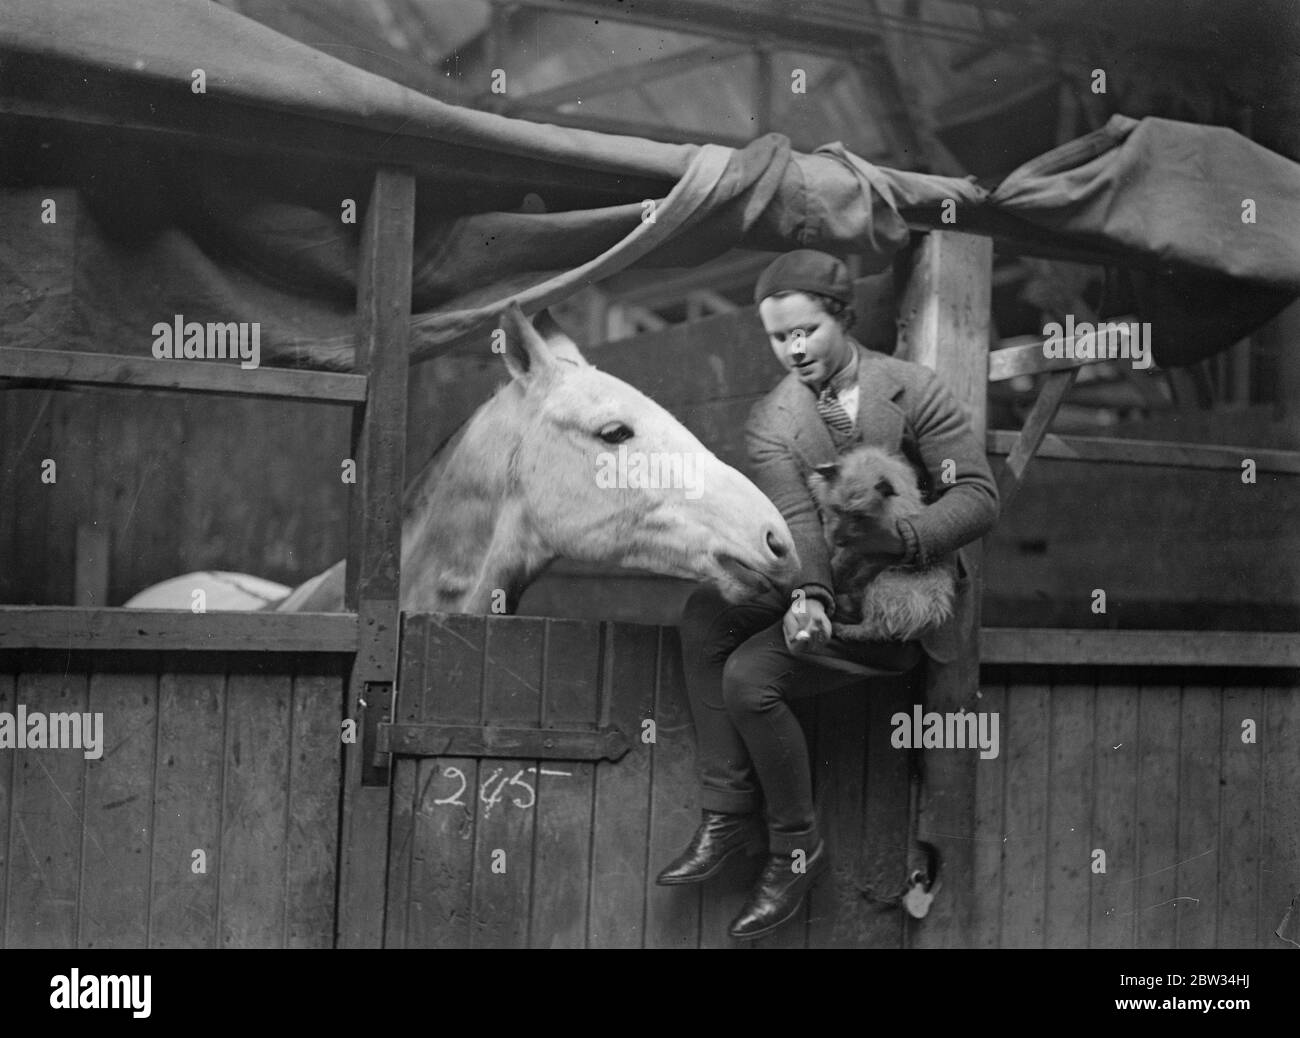 Annual show of hunter and thoroughbred opens in London . The annual Spring show of thoroughbreds and hunters opened at the Royal Agricultural Hall , Islington , London . Miss N Digby introduces one of Lady Wright ' s hunters to a pet dog . 1 March 1932 Stock Photo